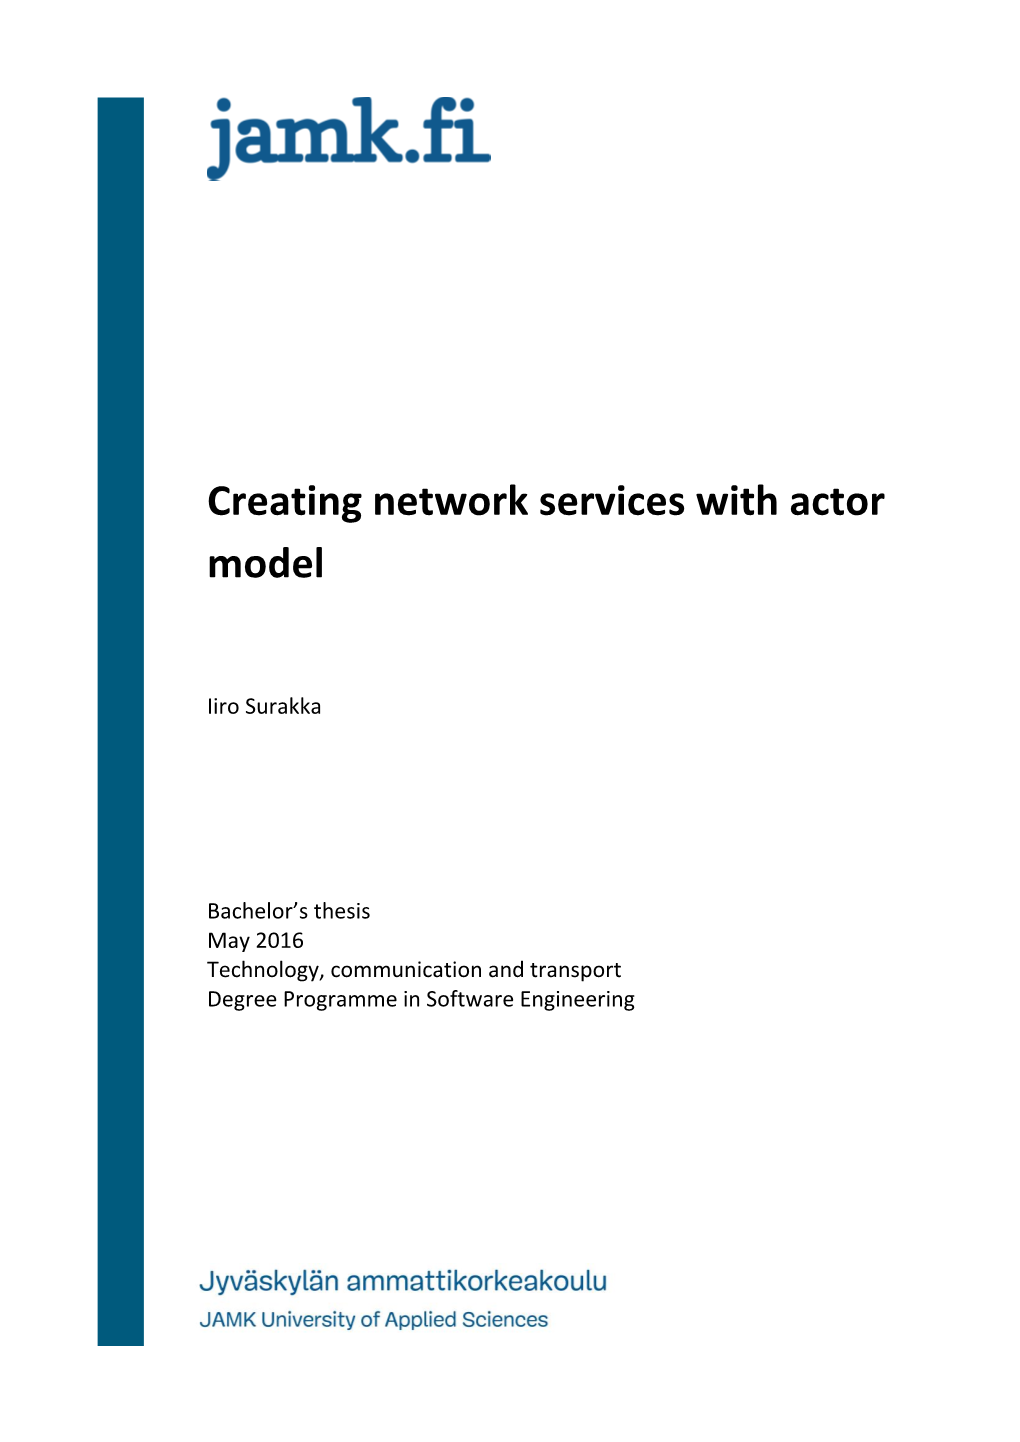 Creating Network Services with Actor Model